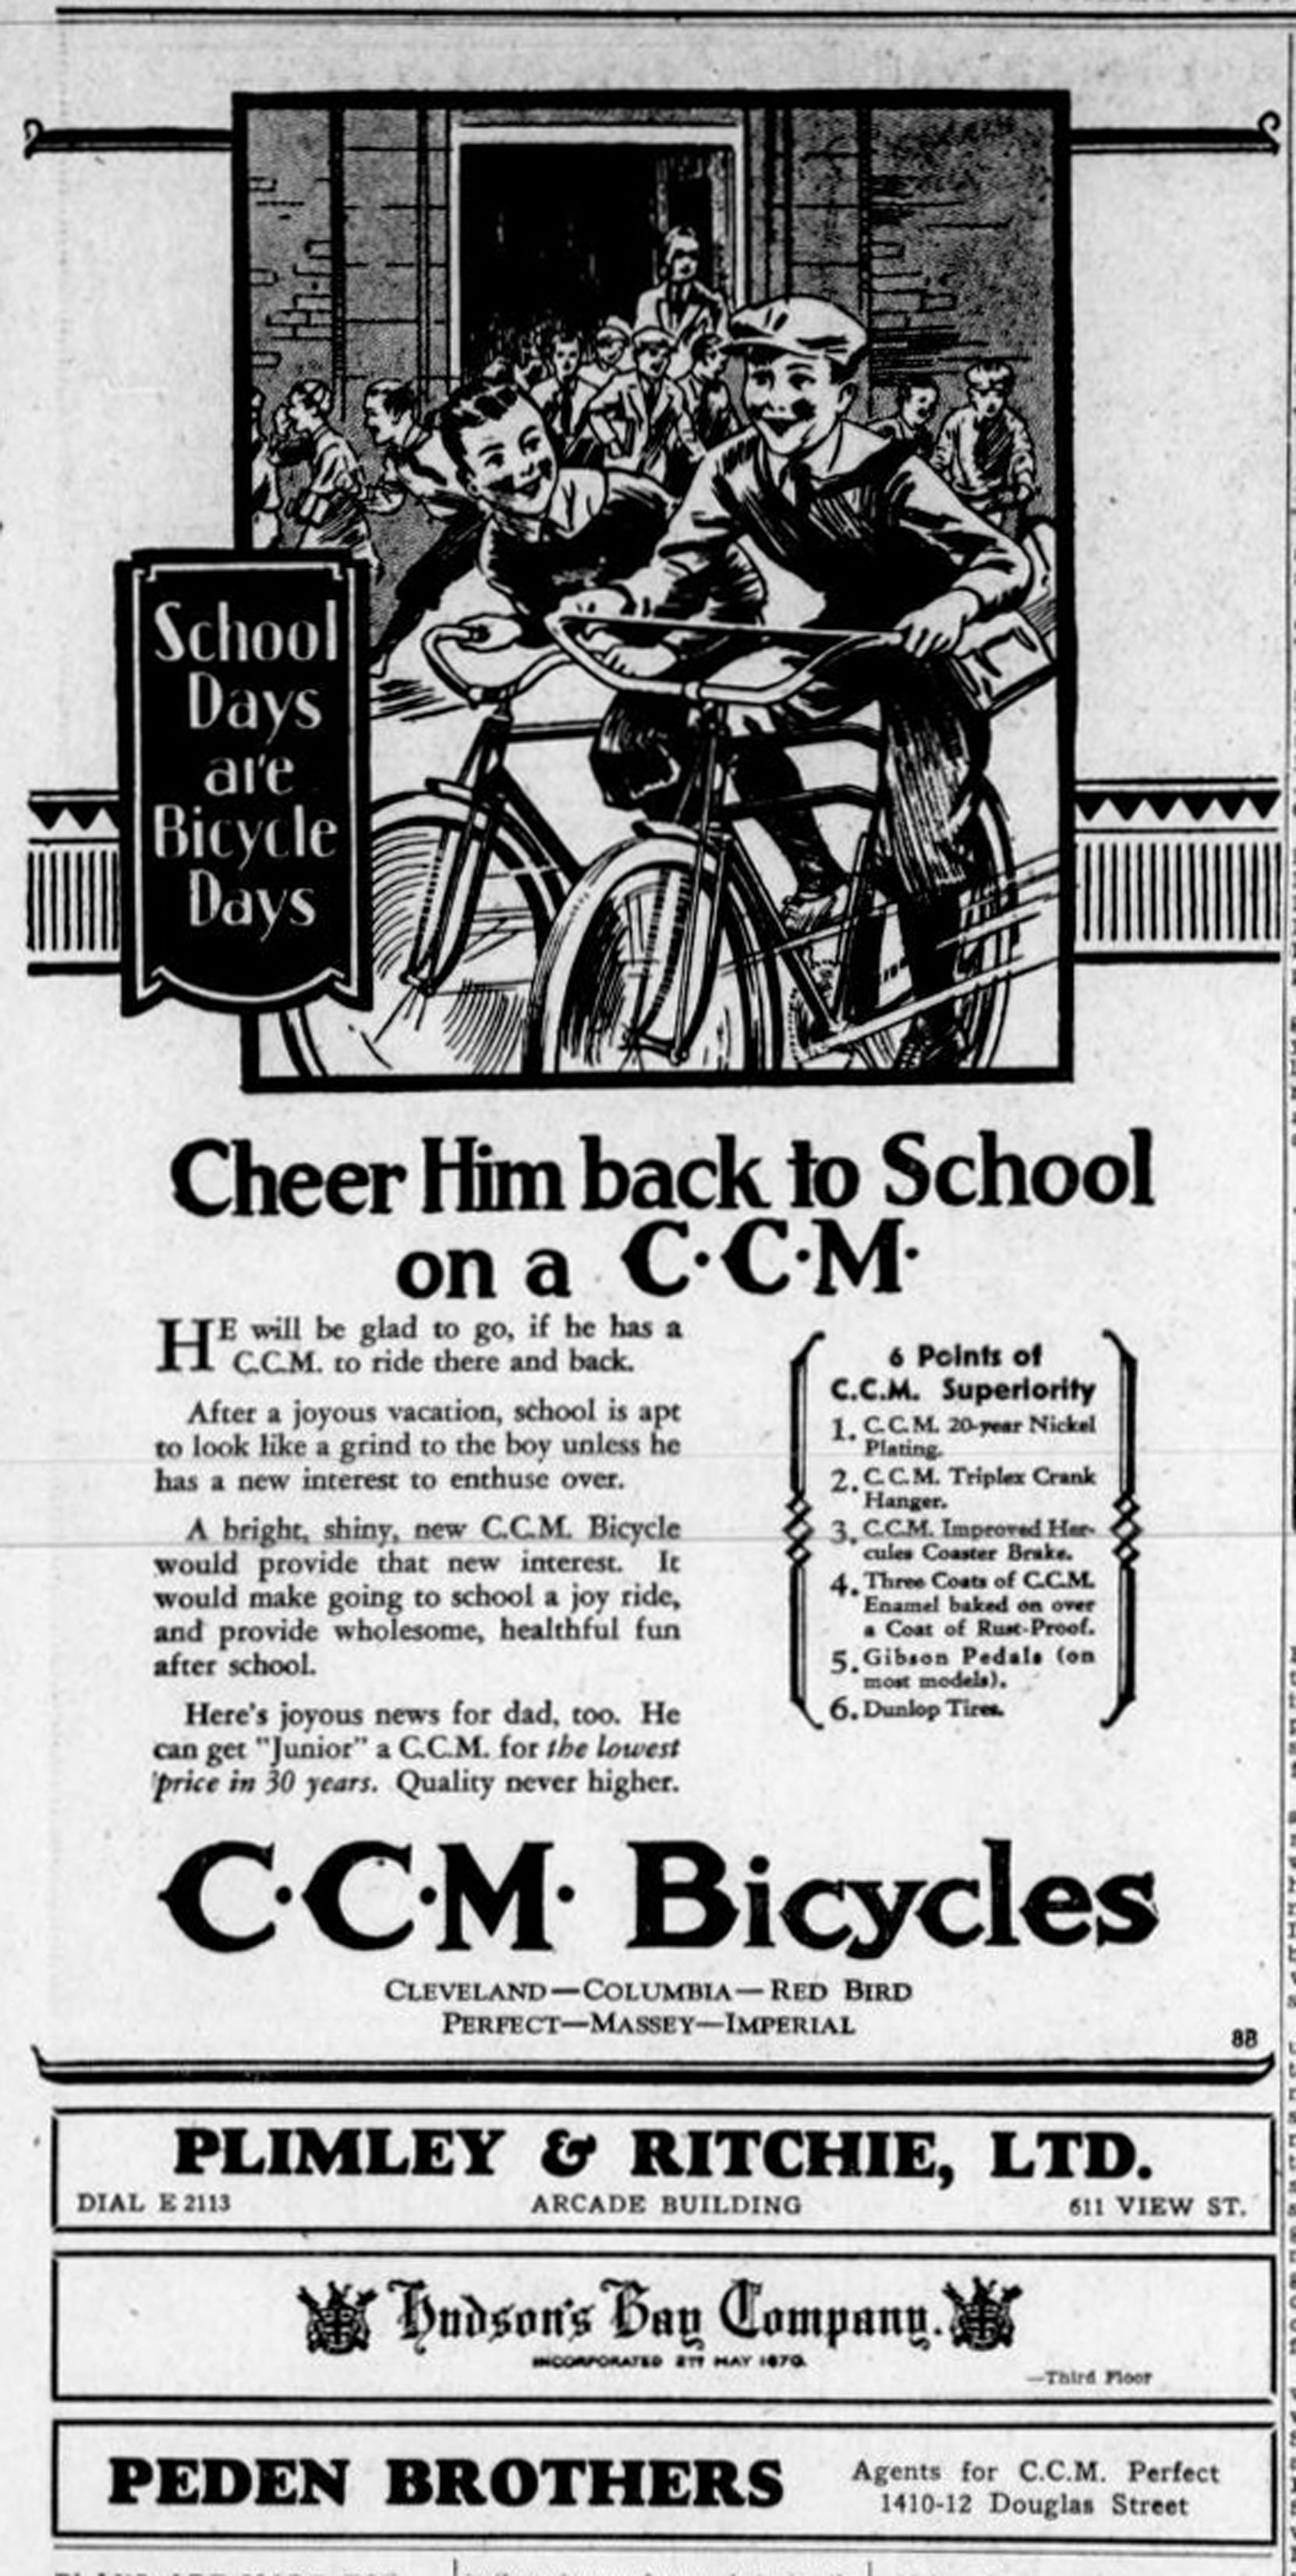 1931 advertisement for CCM Bicycles, available in Victoria at Hudson's Bay Co., 1701 Douglas Street, Plimley & Ritchie in the (now demolished) Arcade Building and Peden Brothers, 1410-1412 Douglas Street. (Victoria Online Sightseeing Tours collection)